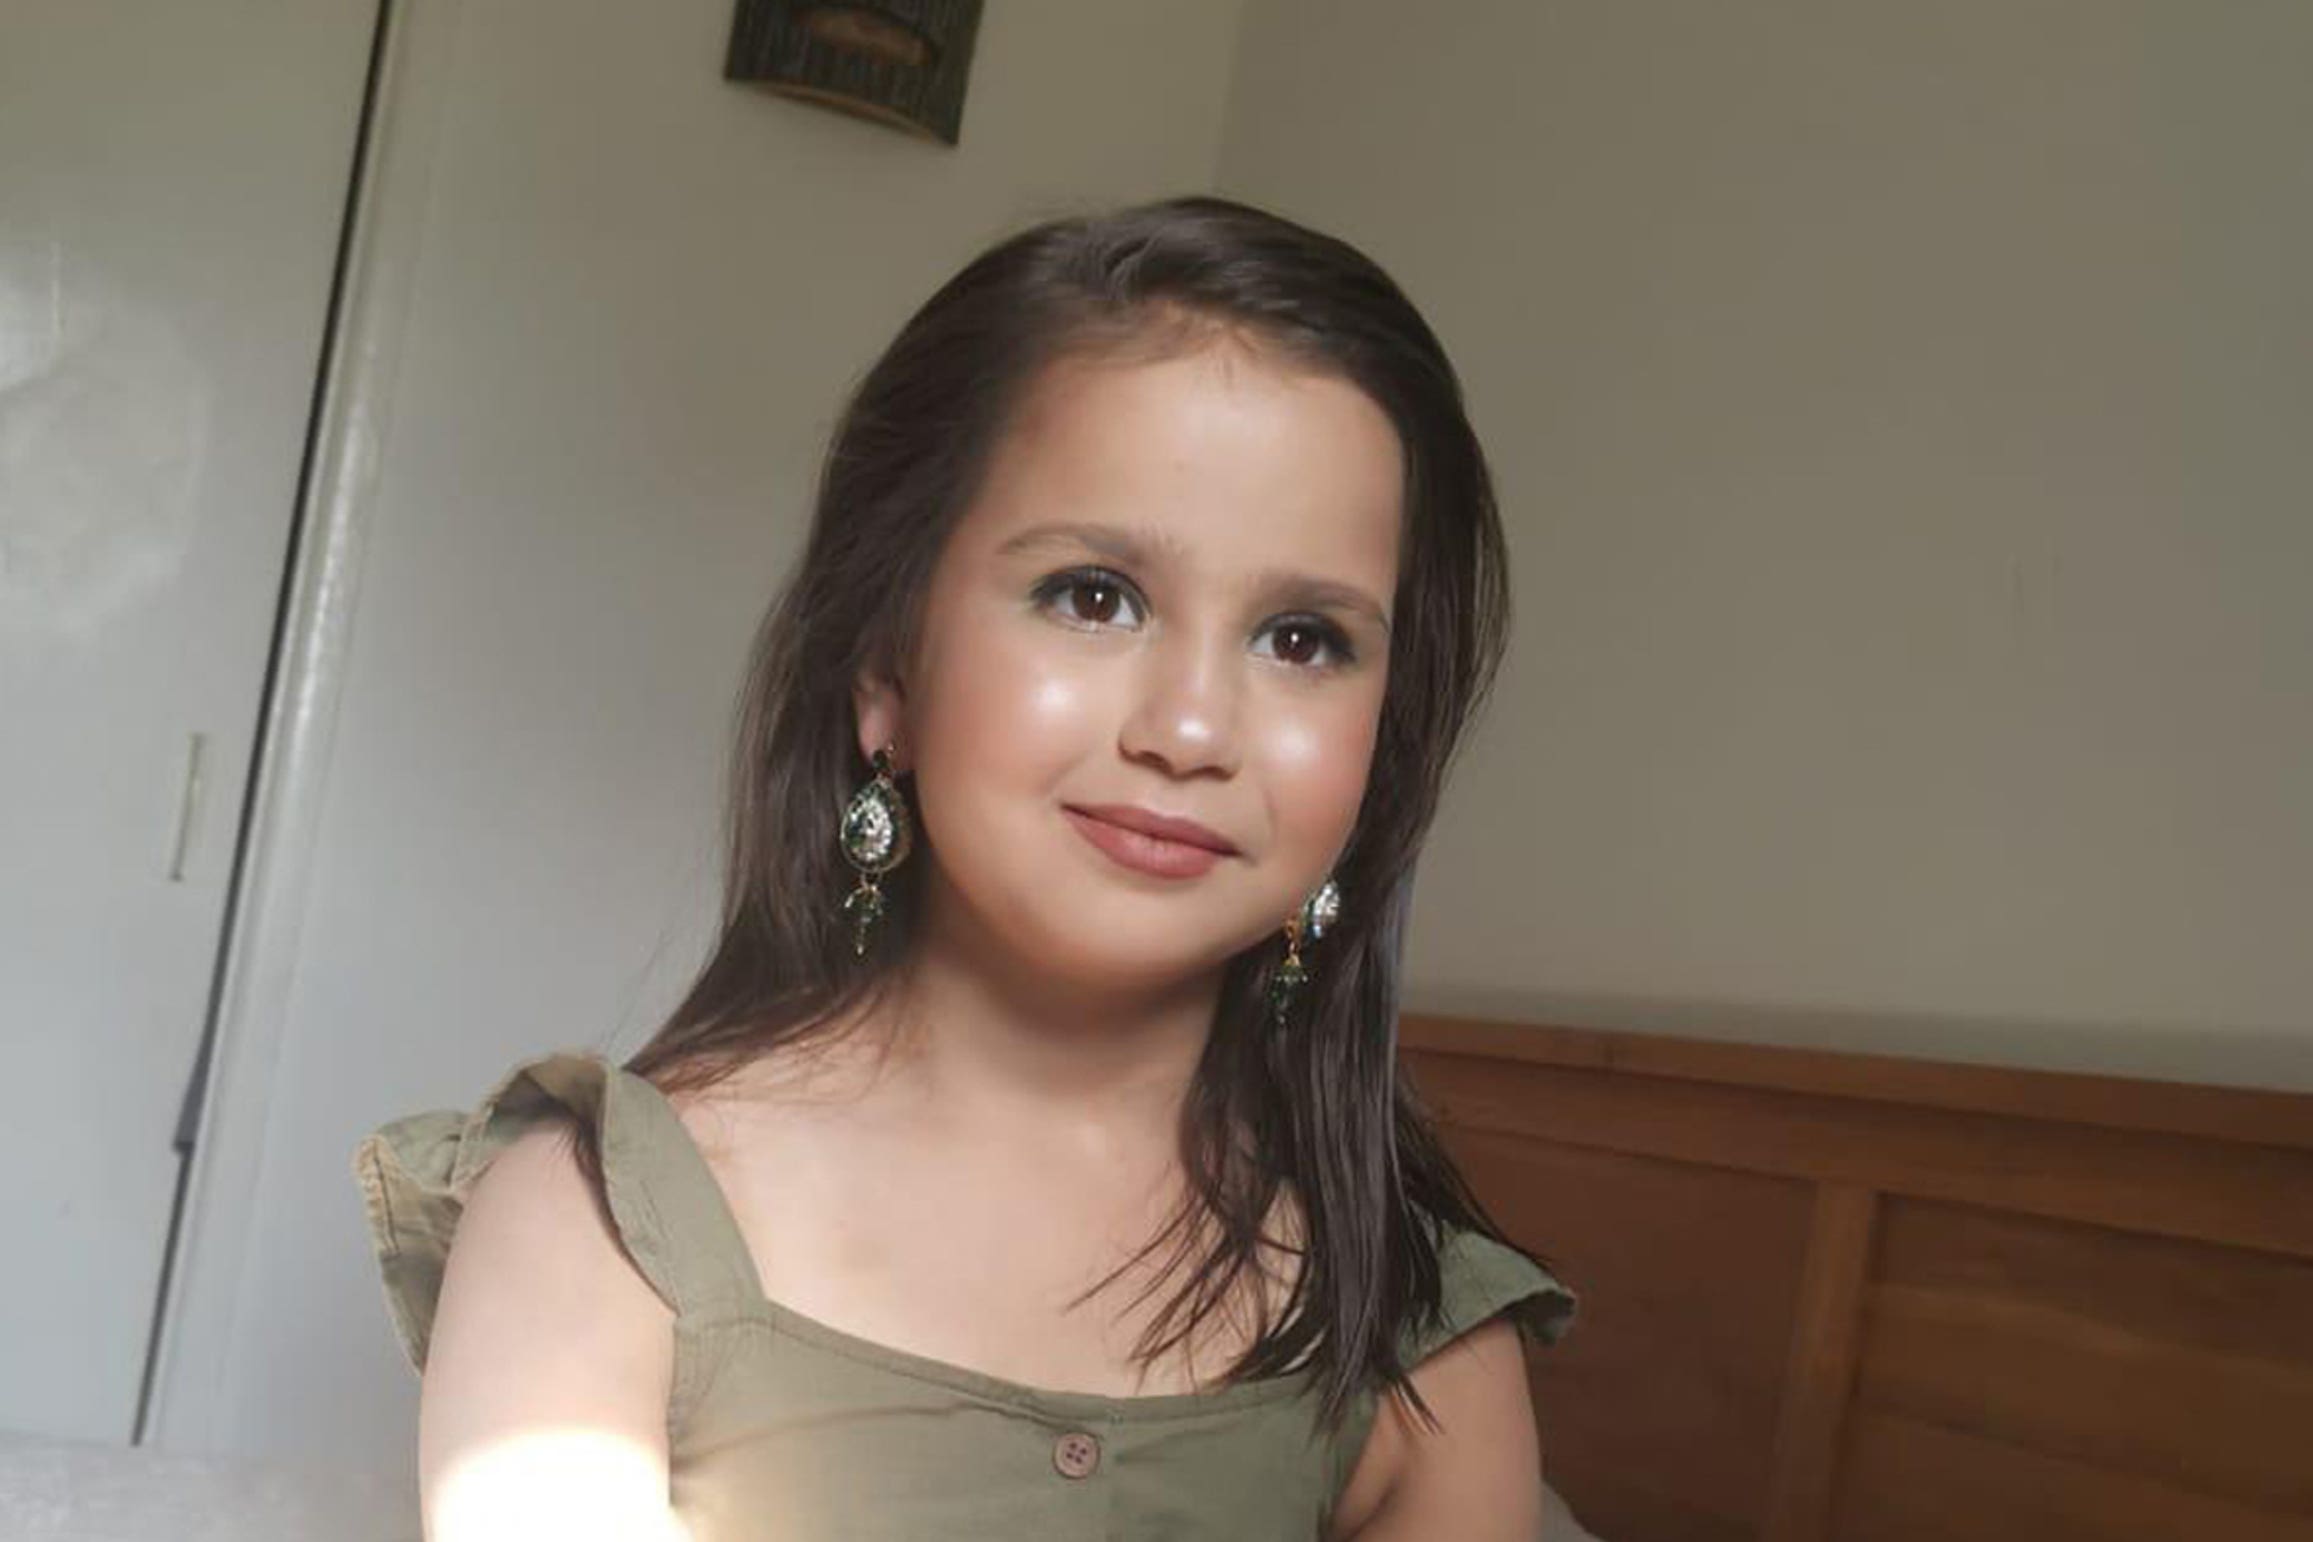 The body of 10-year-old Sara Sharif was found under a blanket on a bunk bed at her home in Woking, Surrey, in August